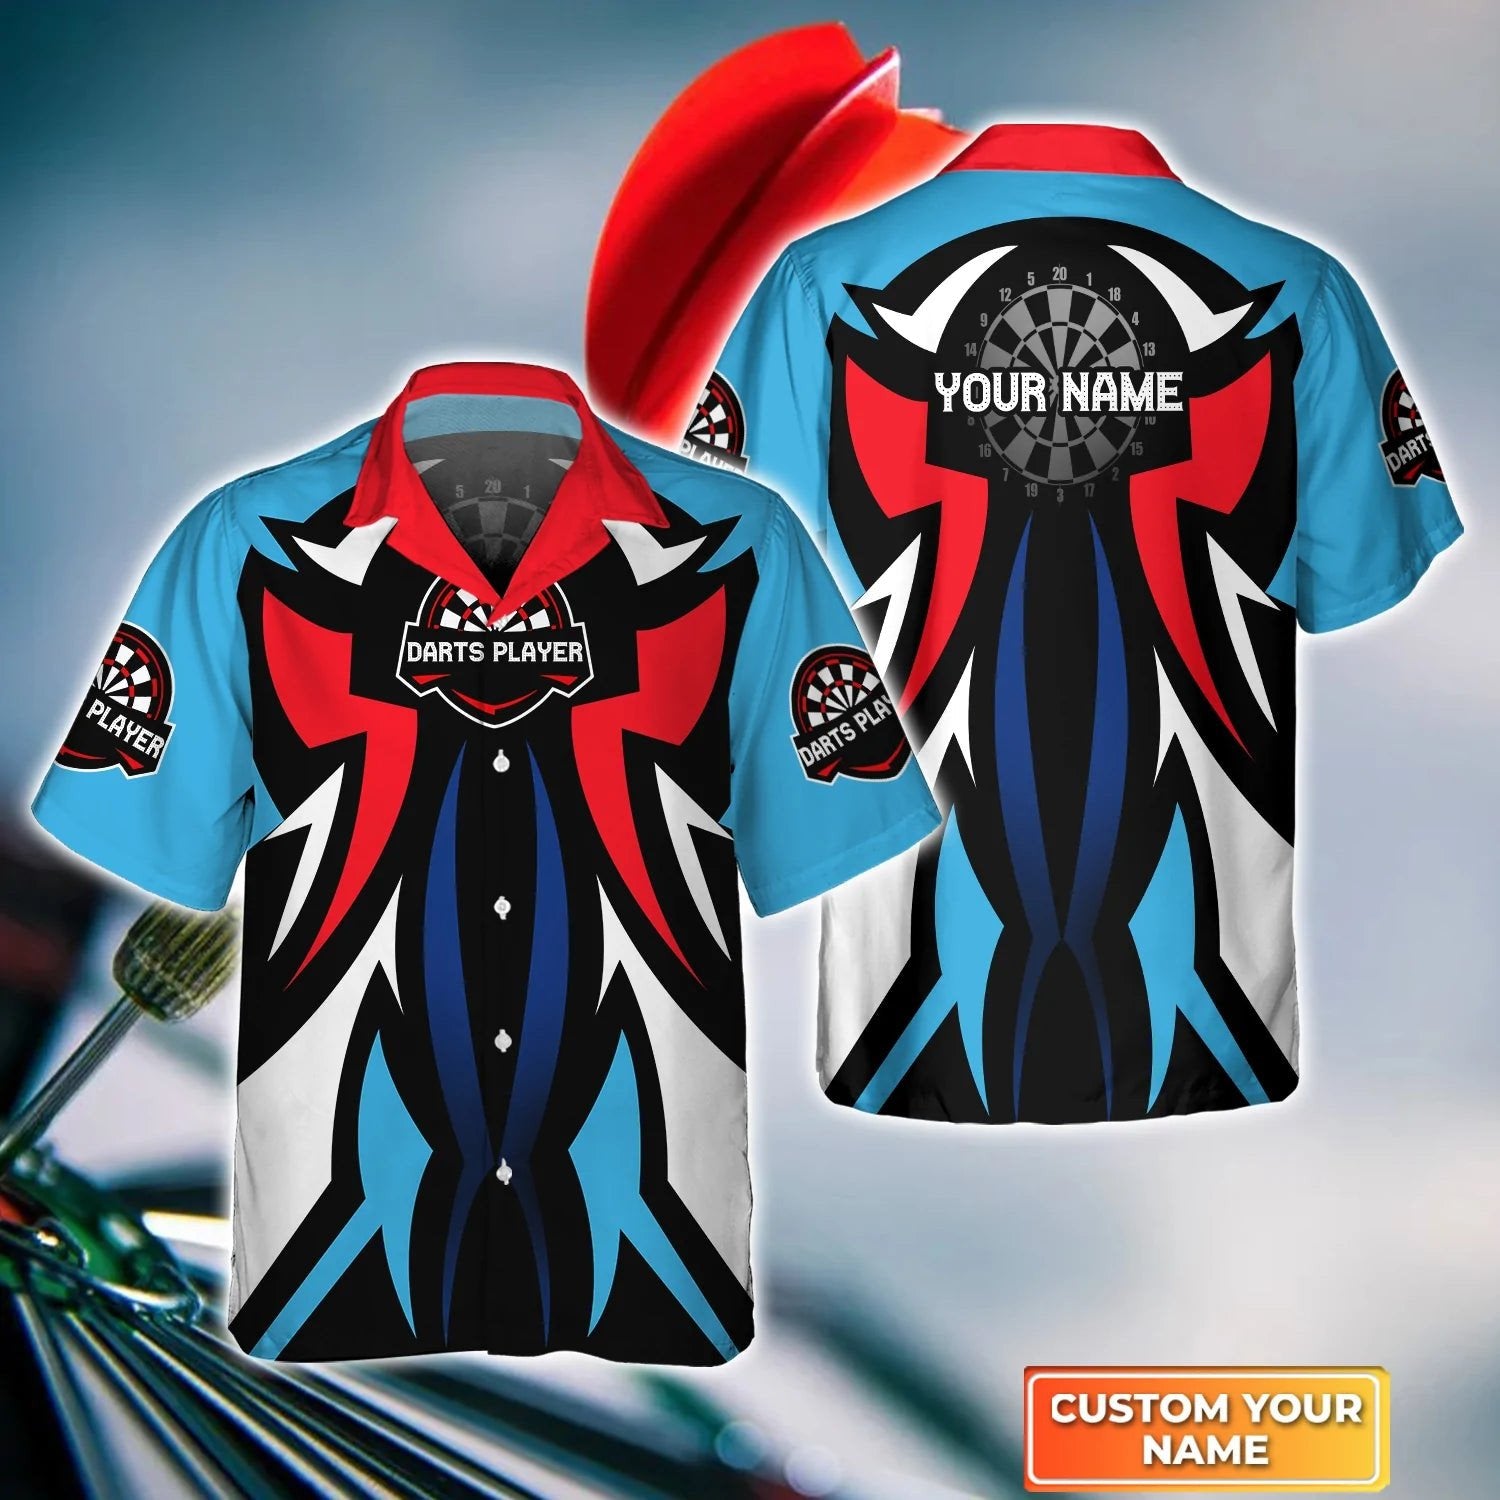 Dartboard And Arrow Blue Personalized Name 3D Hawaiian Shirt For Darts Player